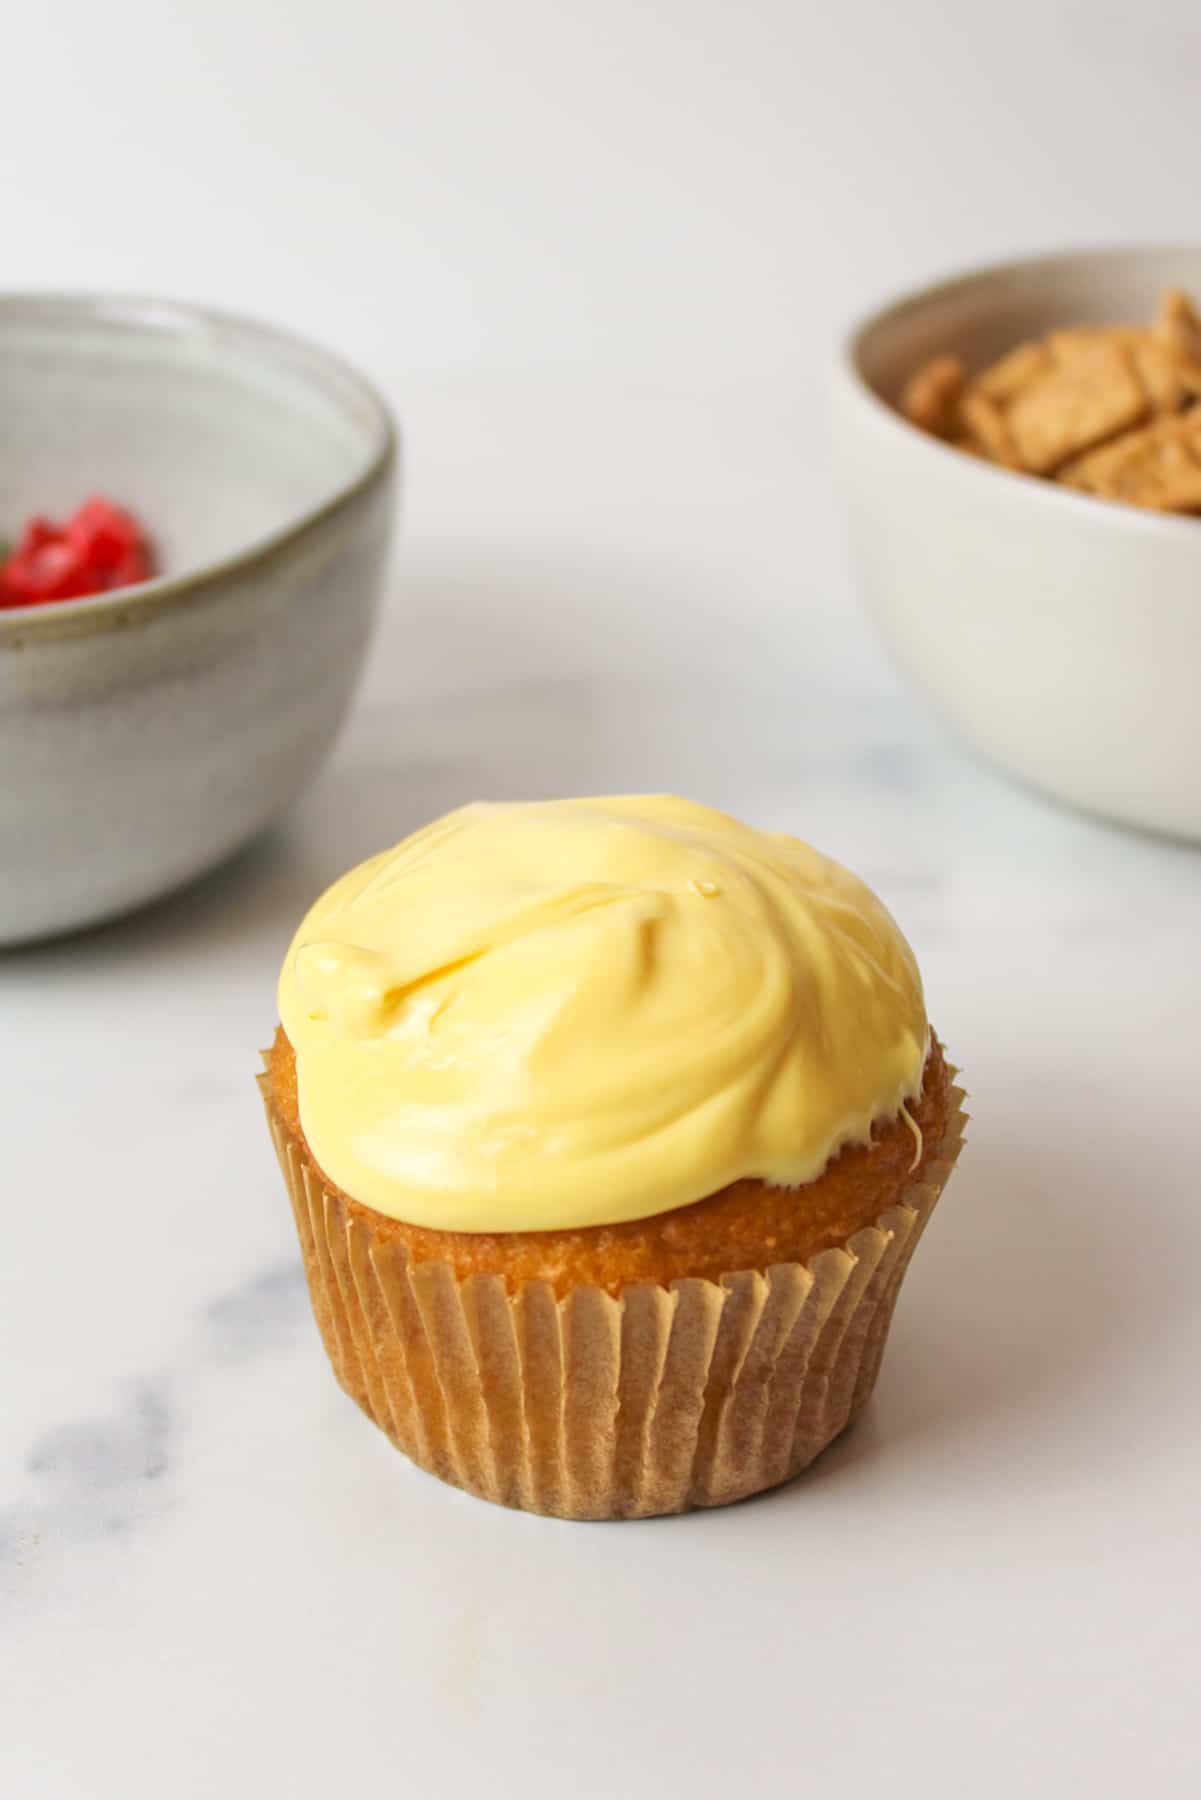 yellow frosting spread over the top of a yellow cupcake